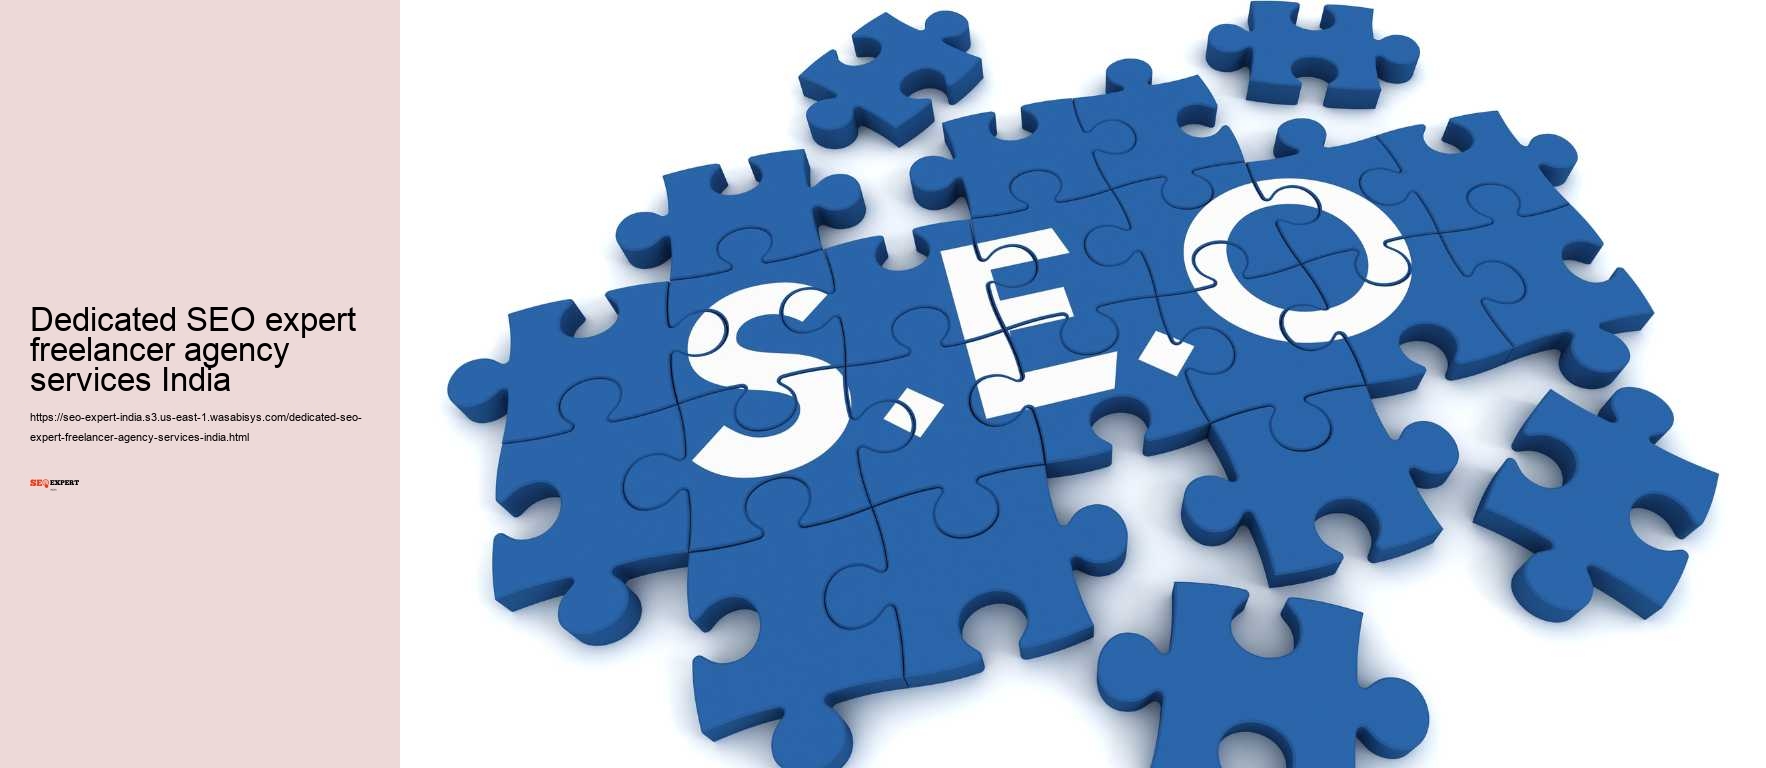 Dedicated SEO expert freelancer agency services India